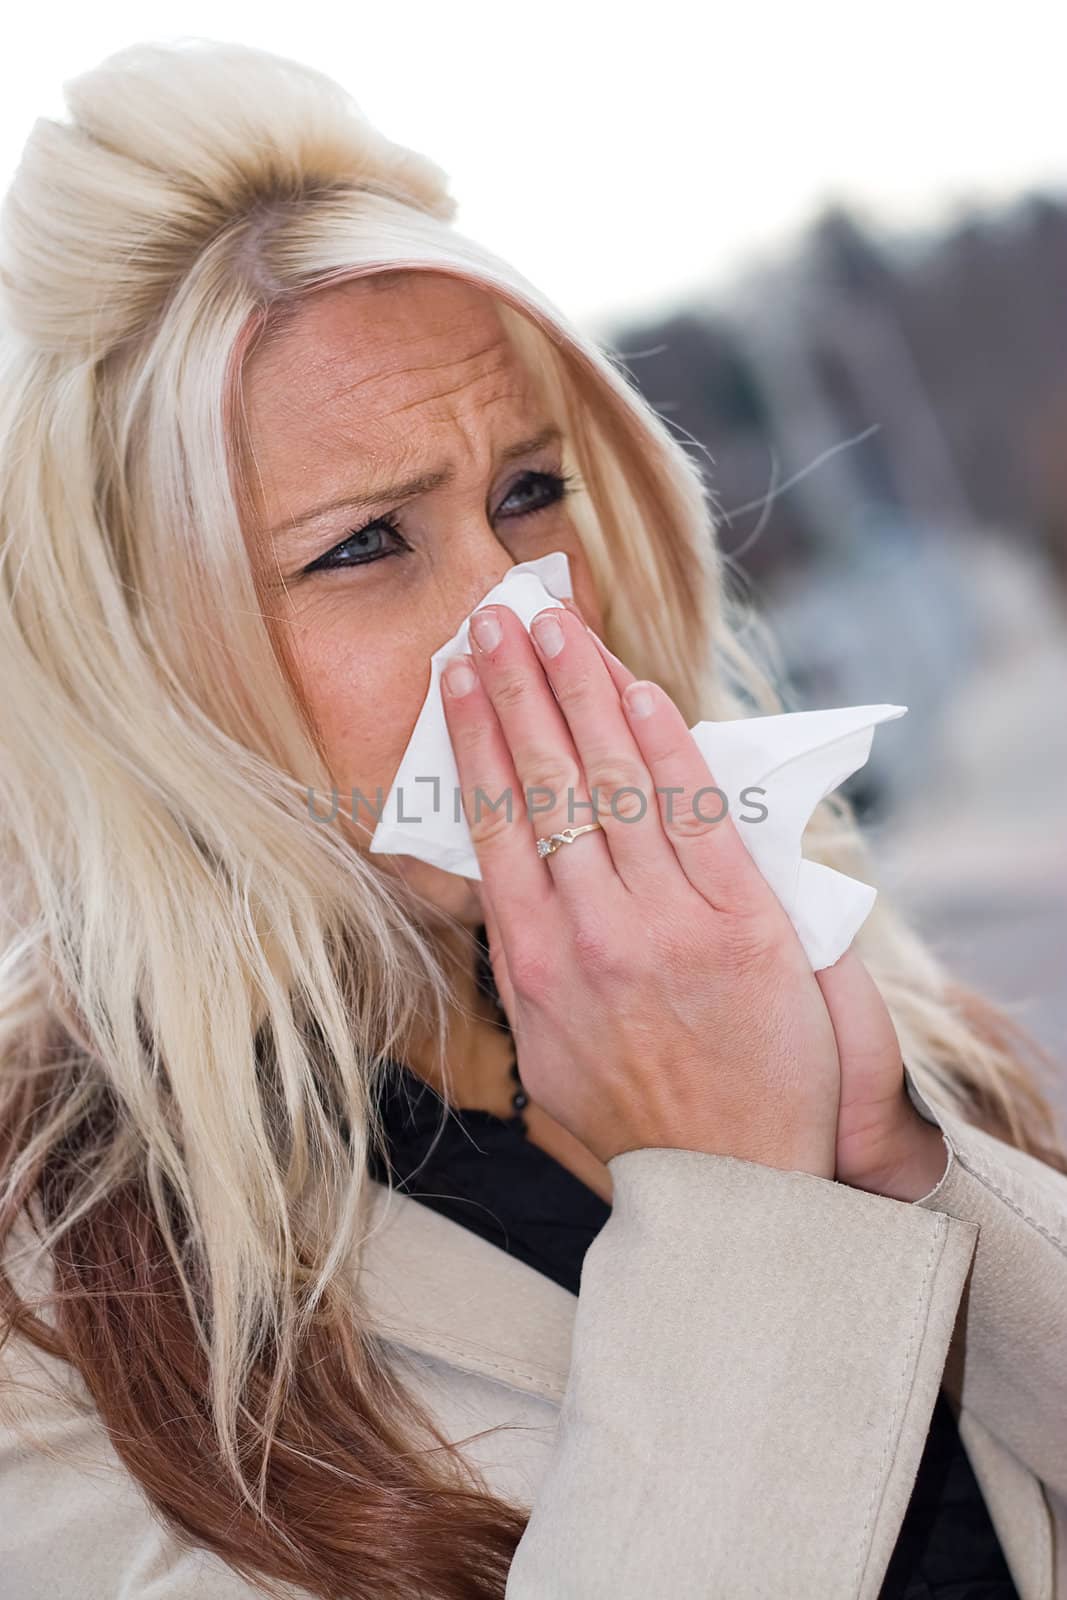 This young woman sneezing into a tissue either has a cold or really bad allergies.